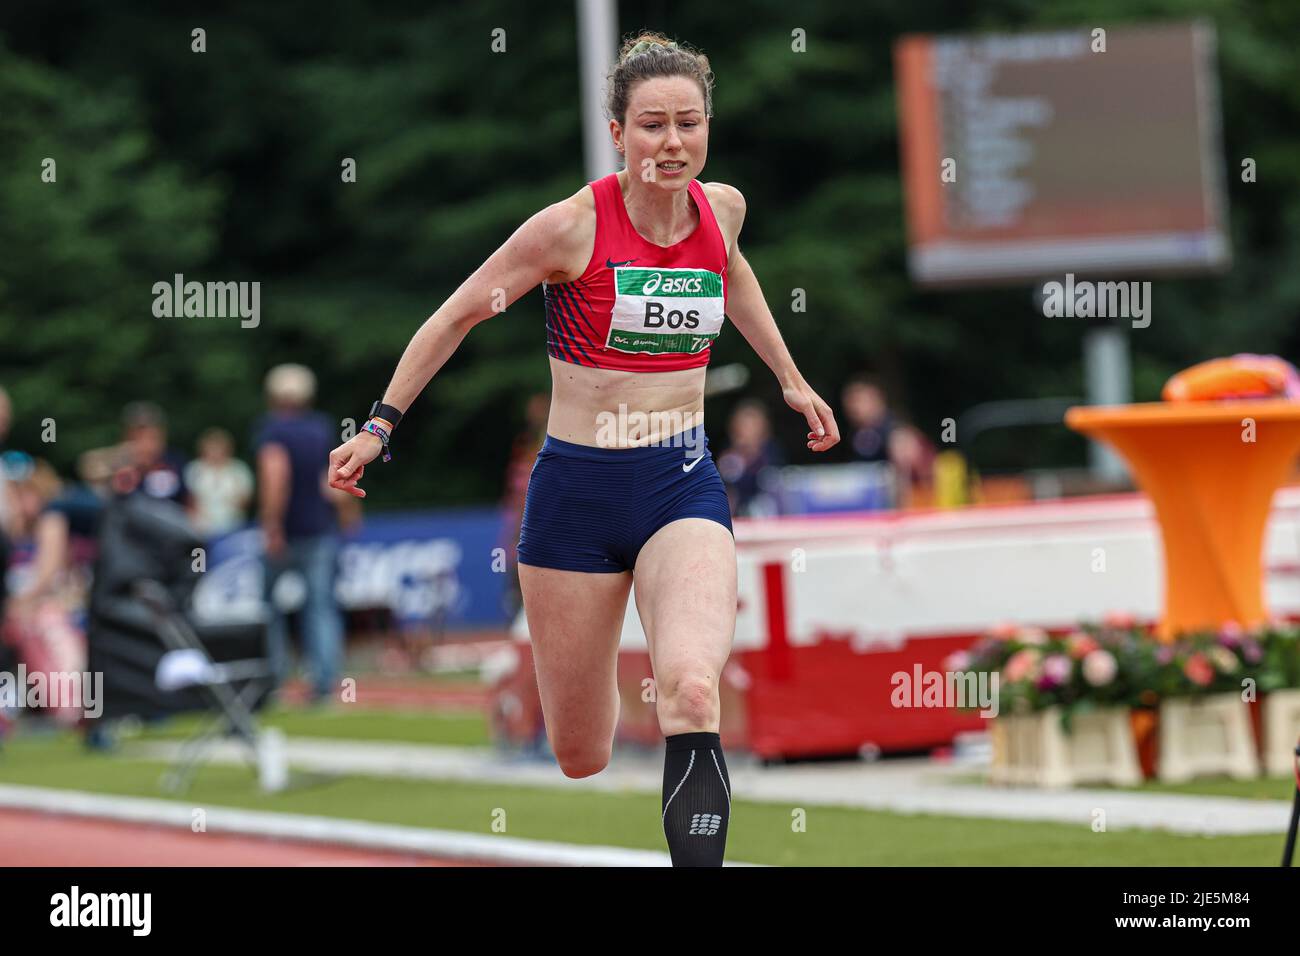 APELDOORN, NETHERLANDS - JUNE 25: Evelien Bos of The Netherlands competing  in the Women's 200m series of the ASICS NK Atletiek 2022 - Day 2 at AV '34  on June 25, 2022